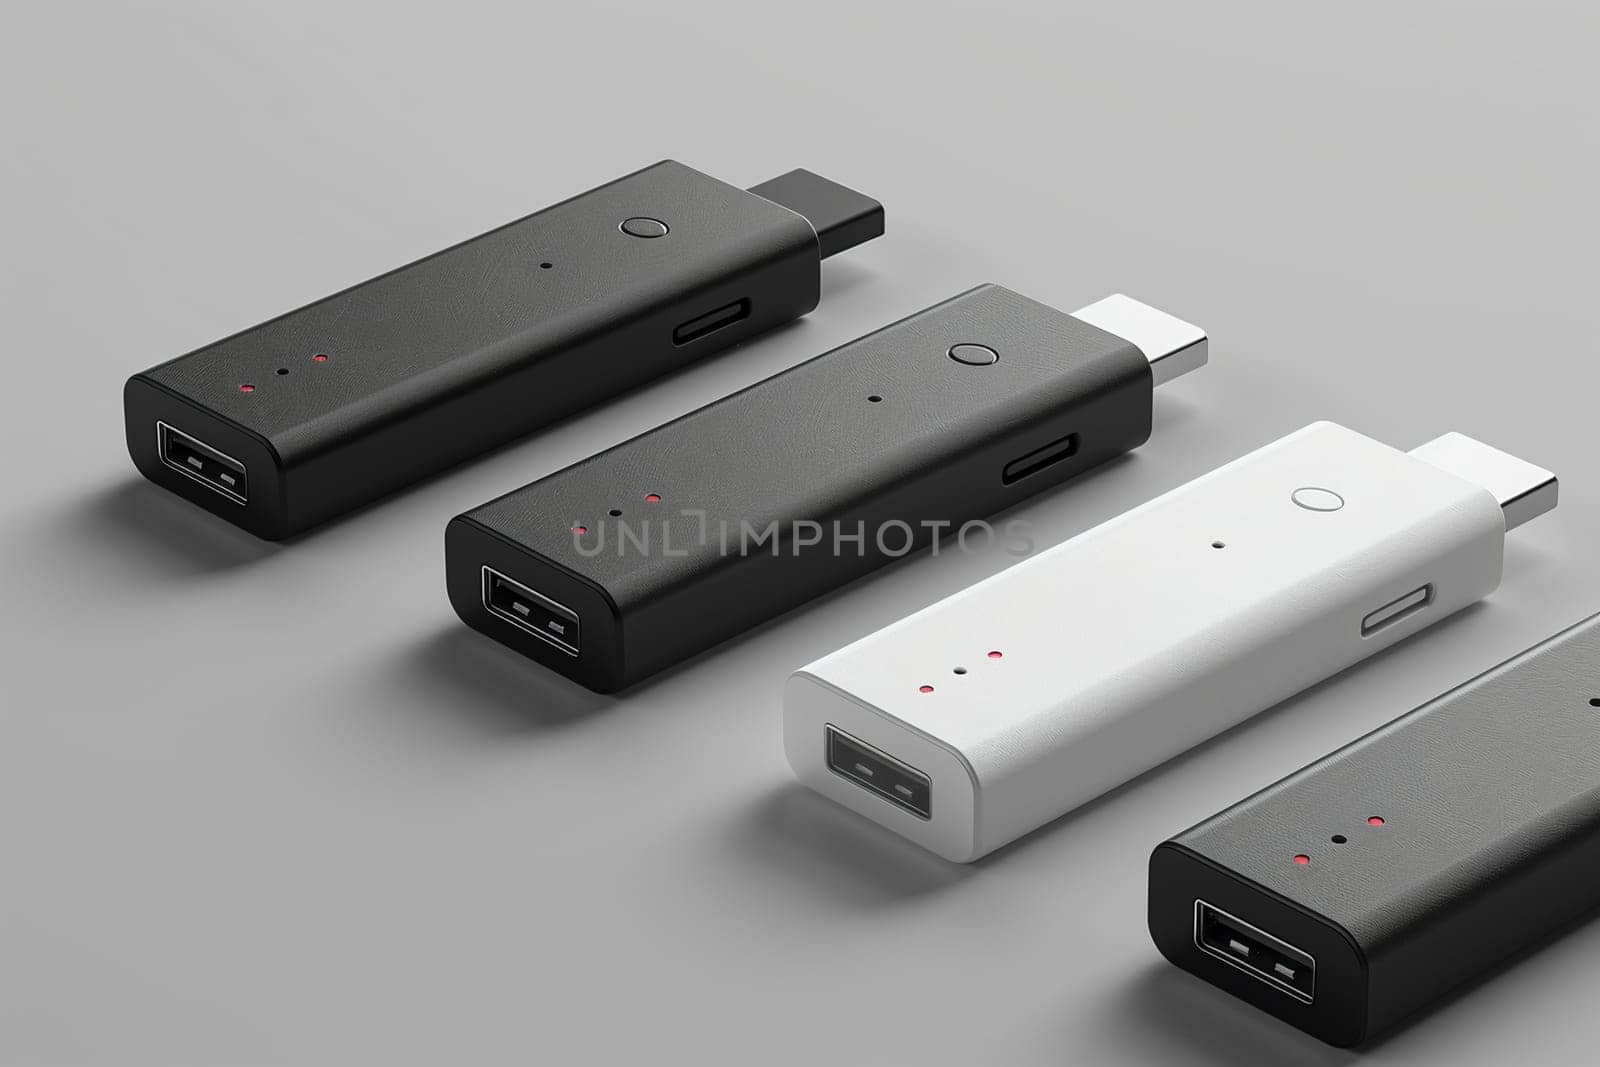 Minimalist Flash Drive Mockup, various angles for tech accessories.